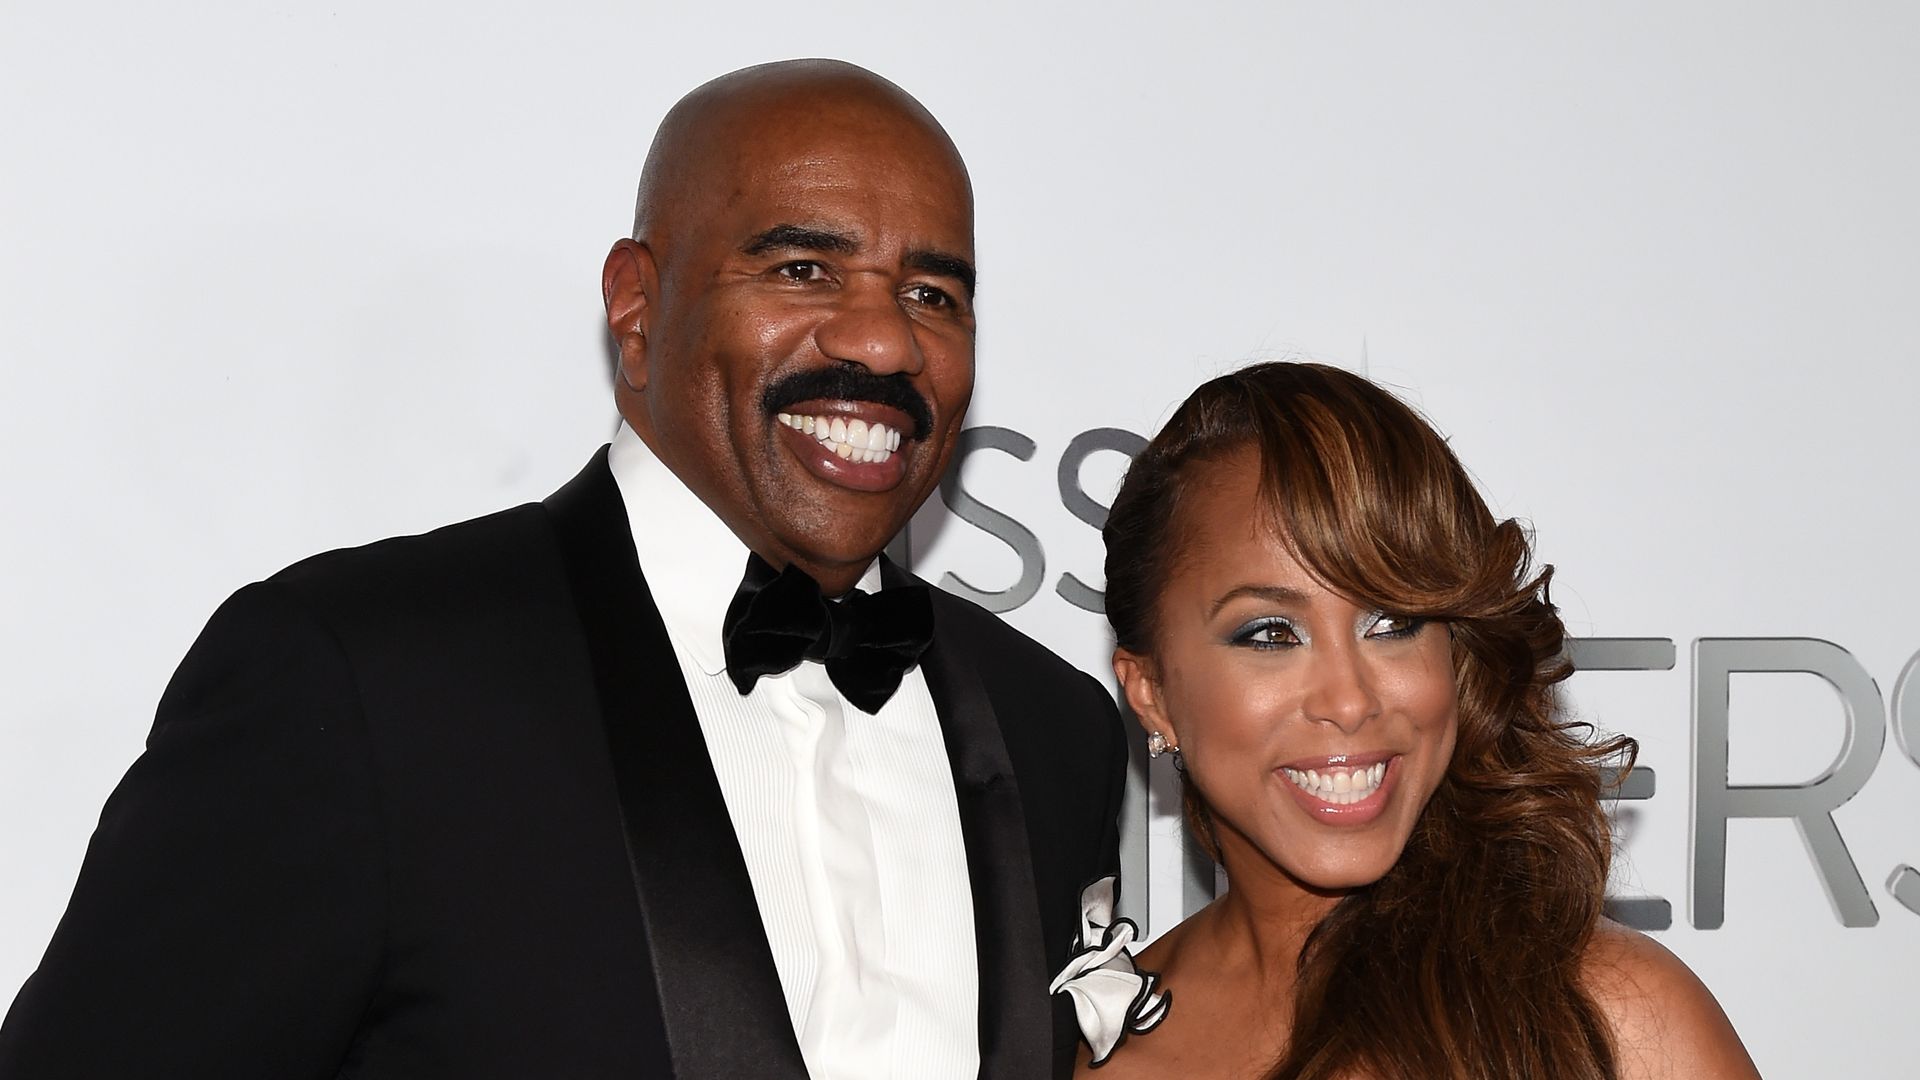 Steve Harvey and his wife Marjorie Harvey attend the 2015 Miss Universe Pageant on December 20, 2015 in Las Vegas, Nevada